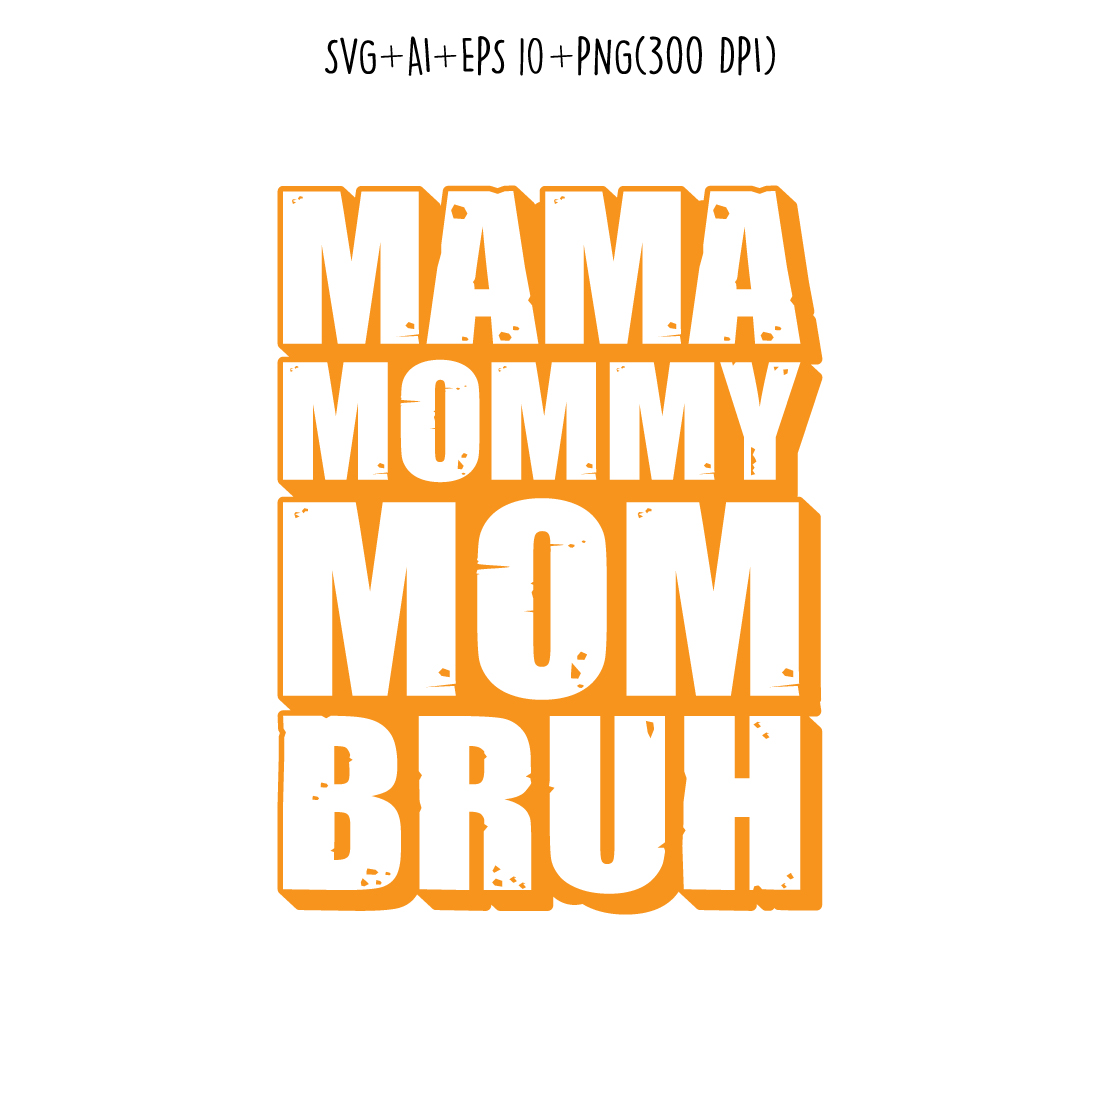 Mama Mommy Mom Bruh mothers day t-shirt design, mom quotes, mothers day quotes for t-shirts, cards, frame artwork, phone cases, bags, mugs, stickers, tumblers, print, etc preview image.